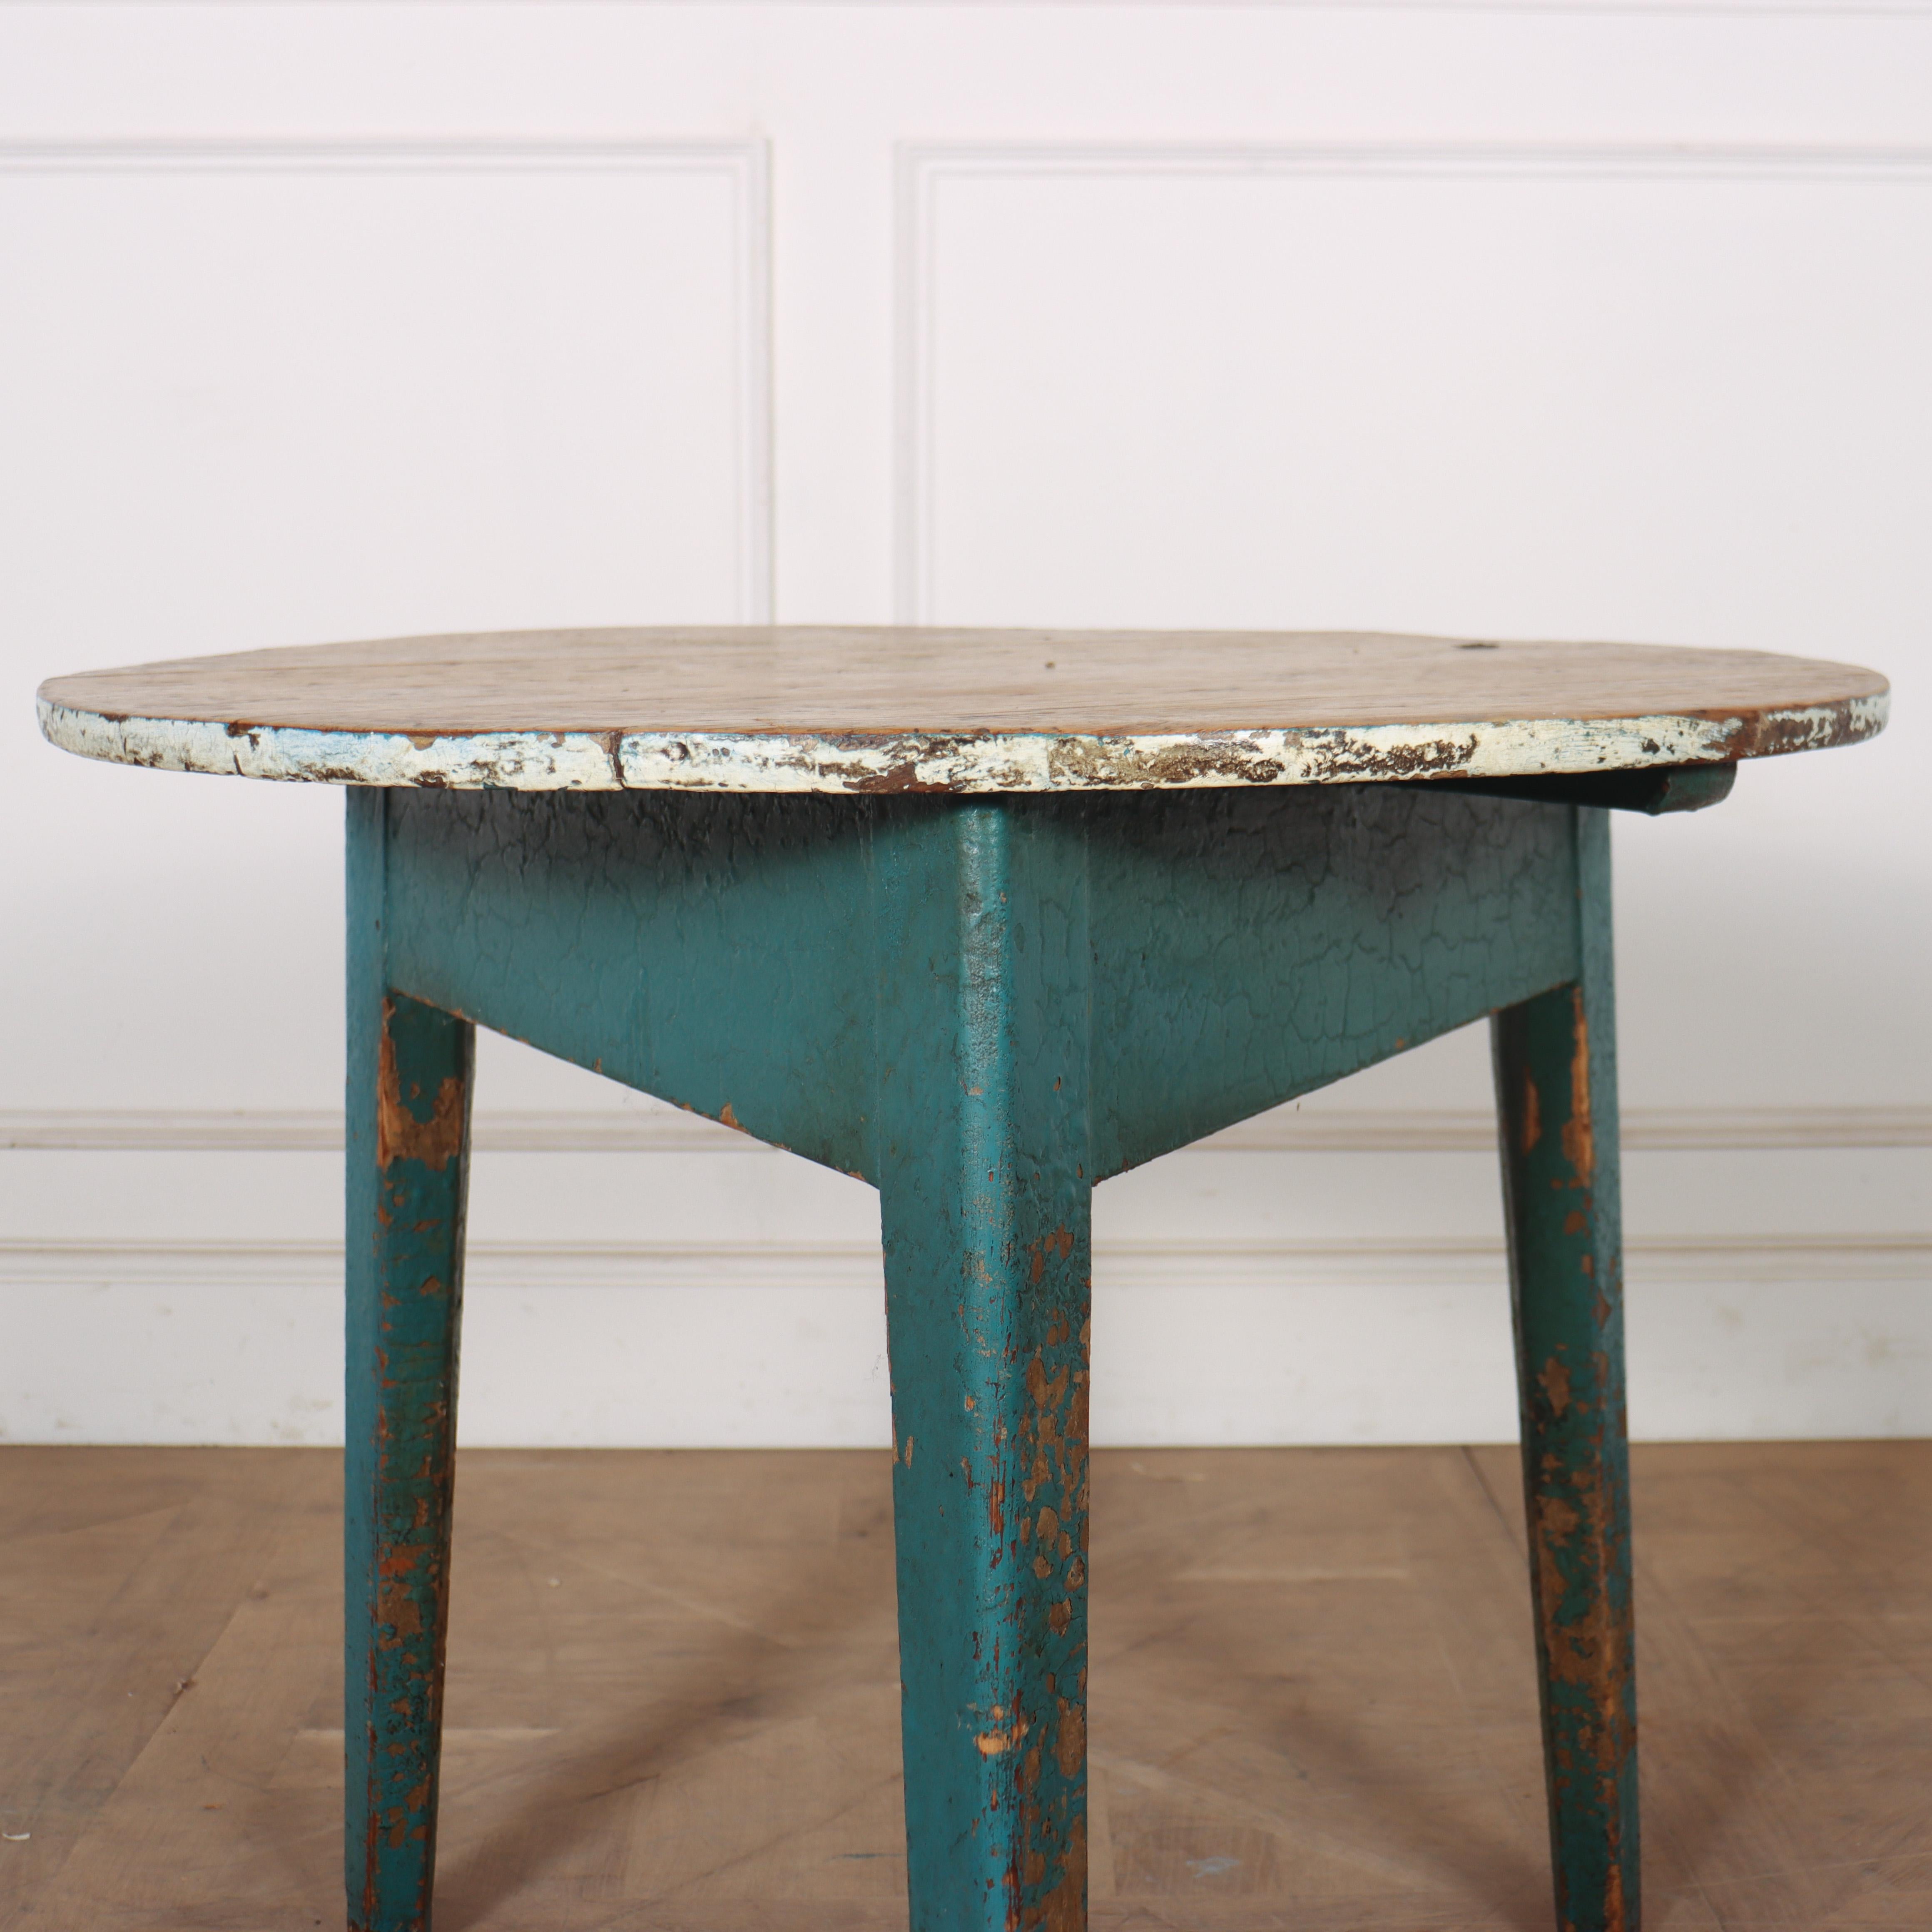 19th C Welsh original painted cricket table with a scrubbed pine top. 1840.

Reference: 8237

Dimensions
27 inches (69 cms) High
30 inches (76 cms) Diameter